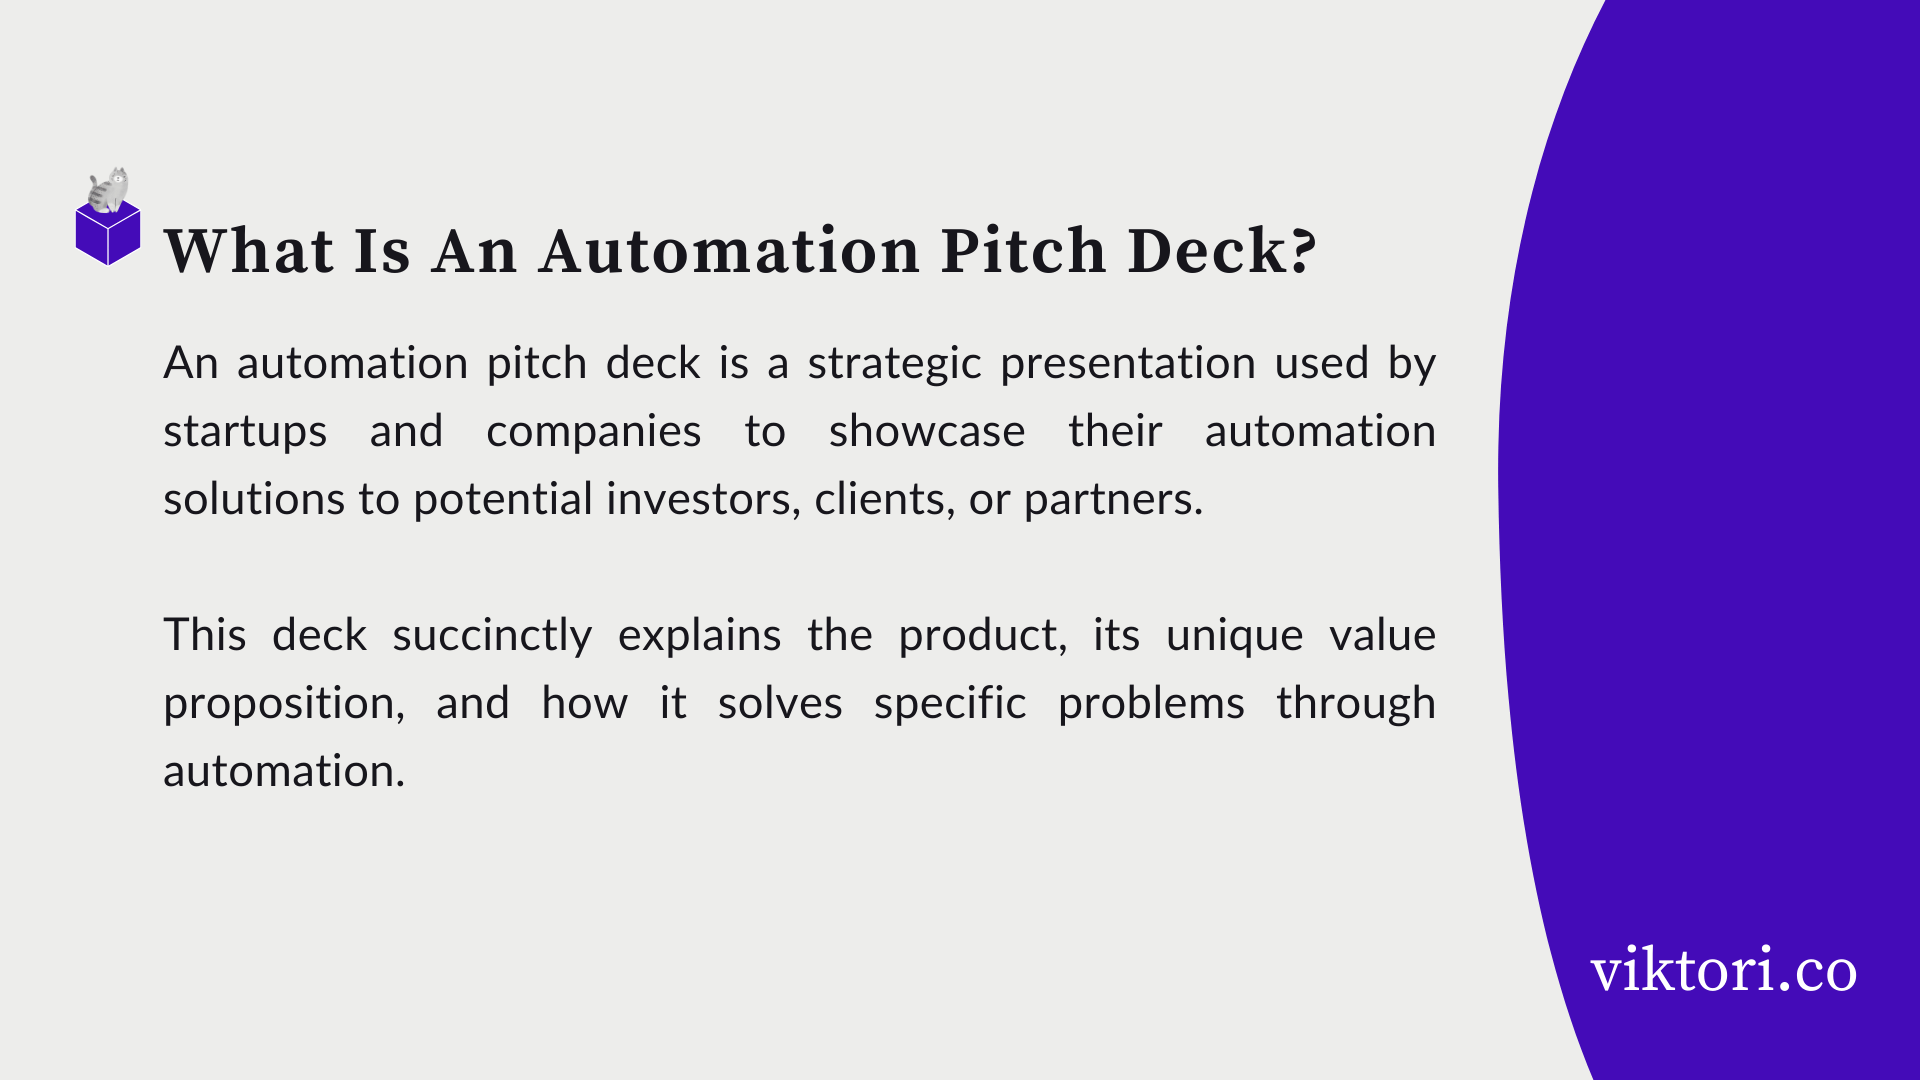 What is an Automation Pitch Deck? The definition